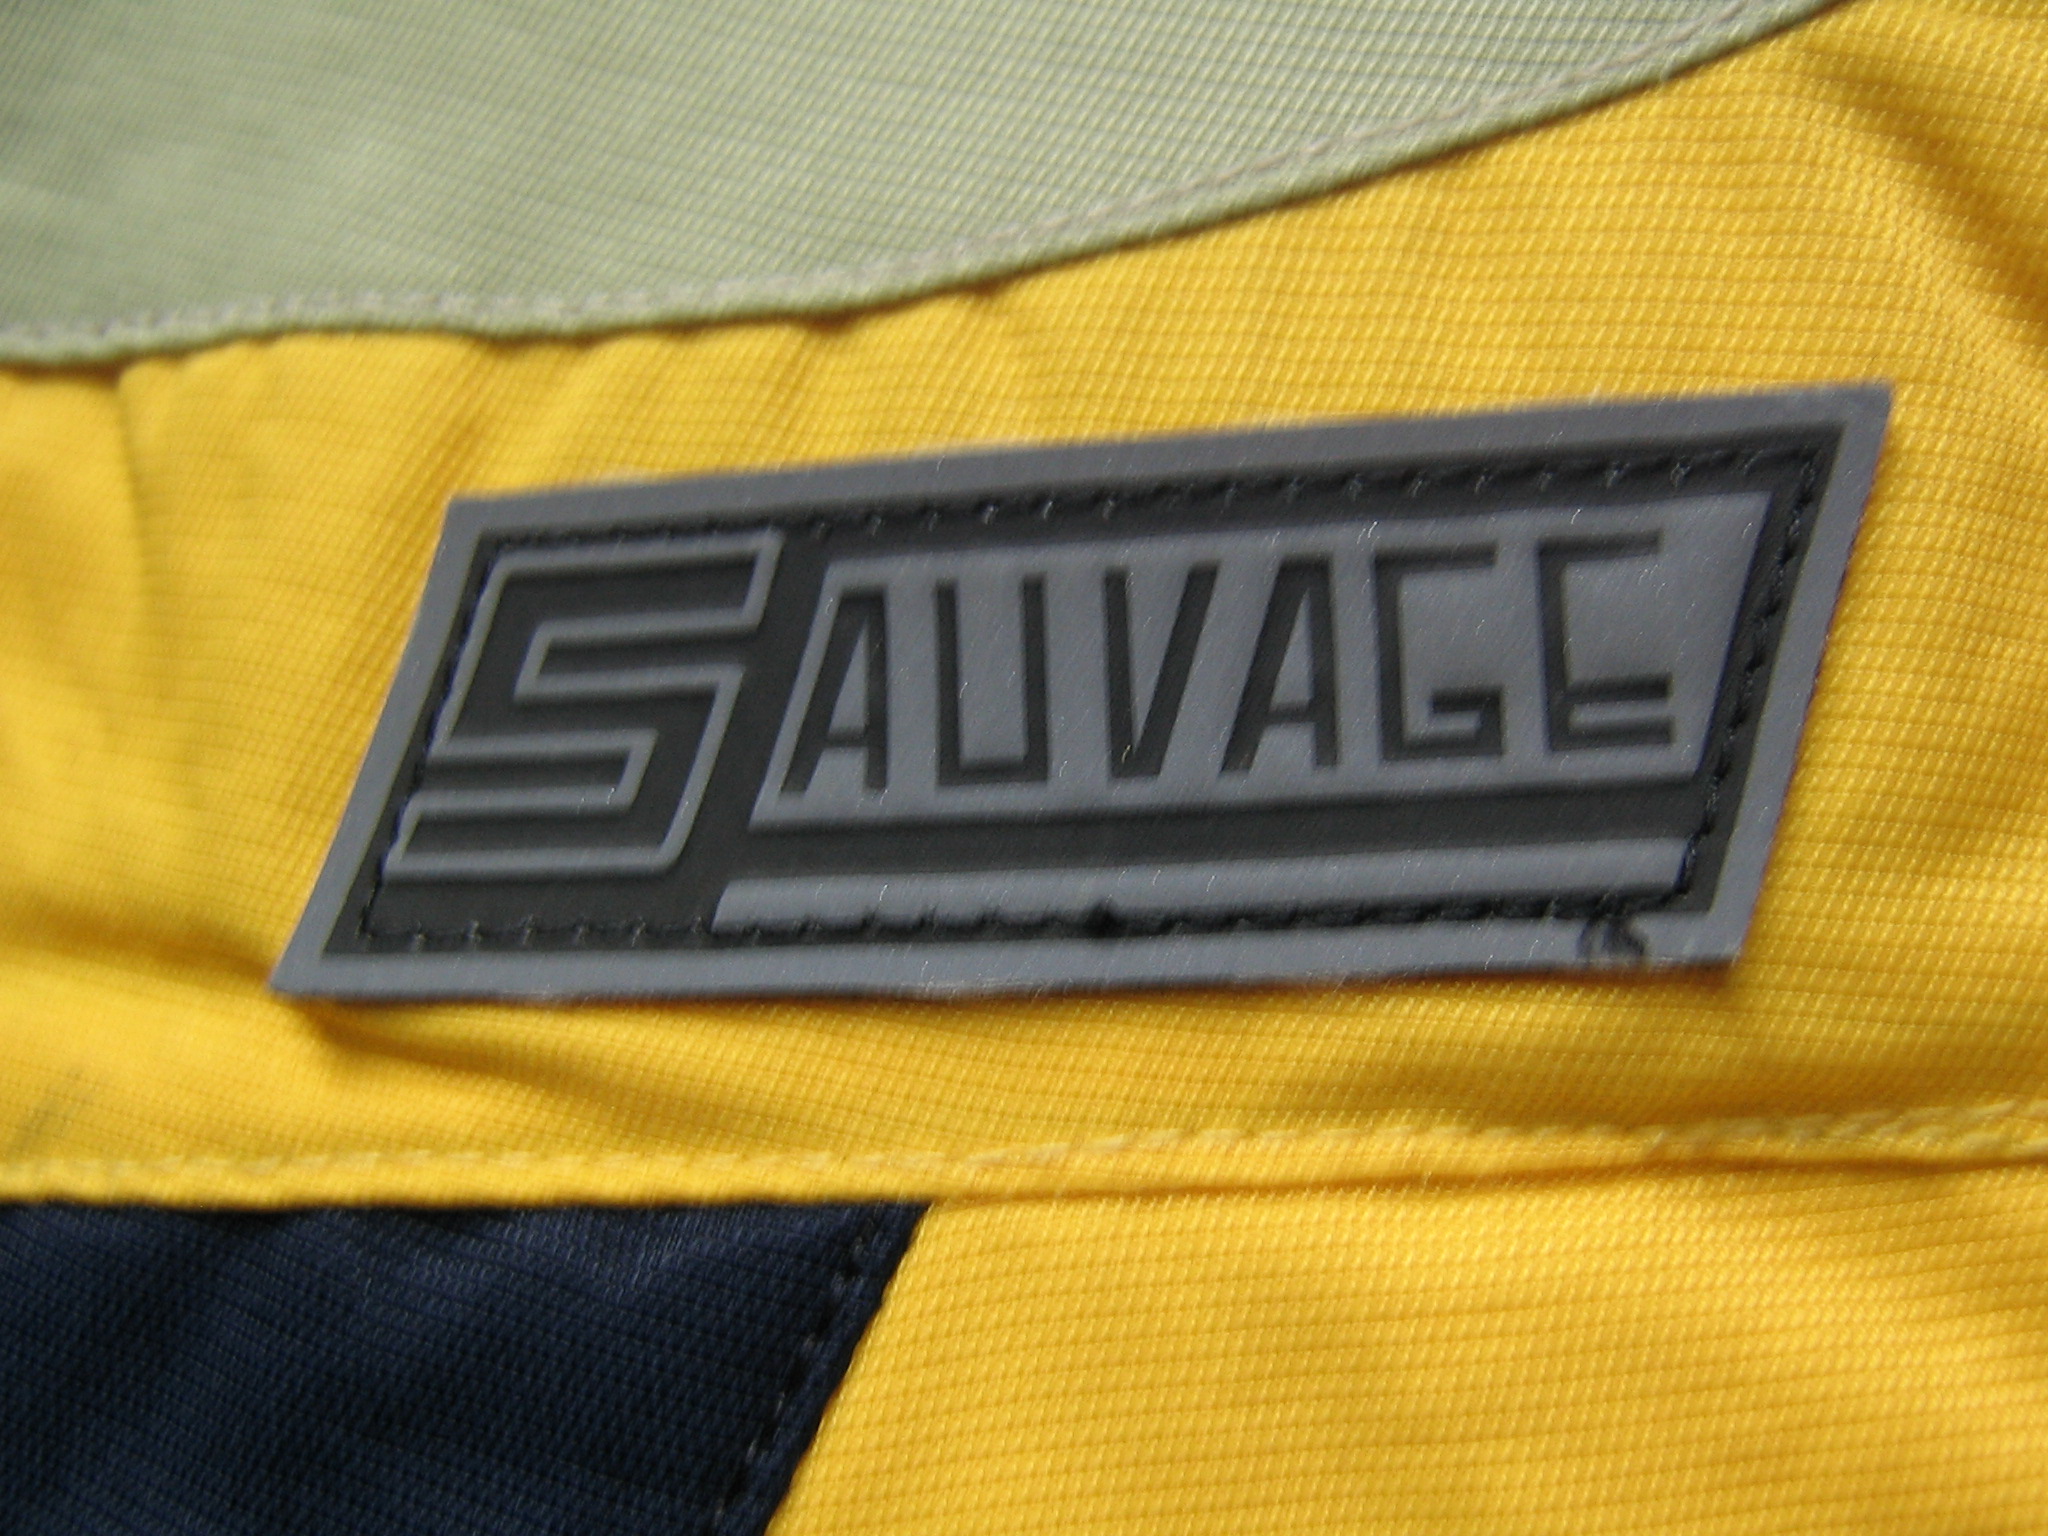 Sauvage Overal